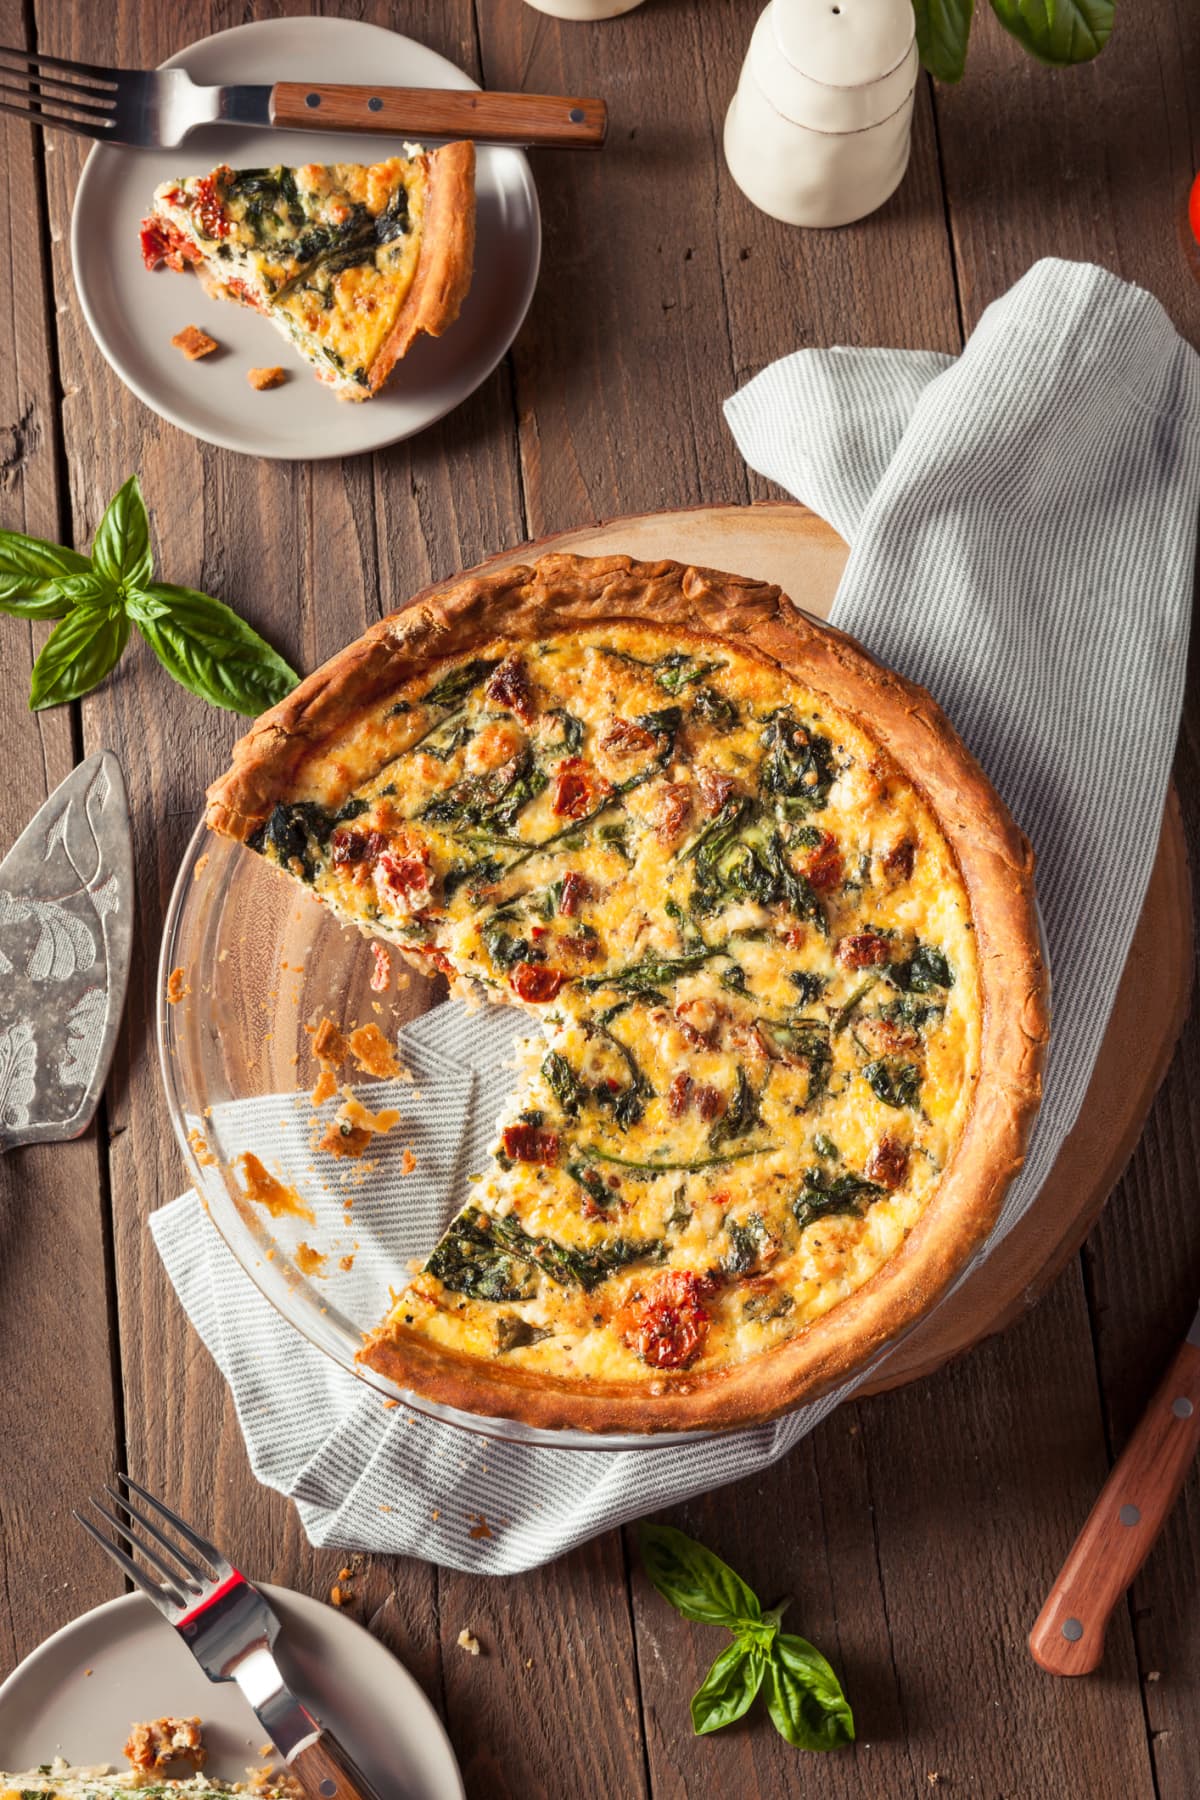 Pie dish of quiche with slice removed